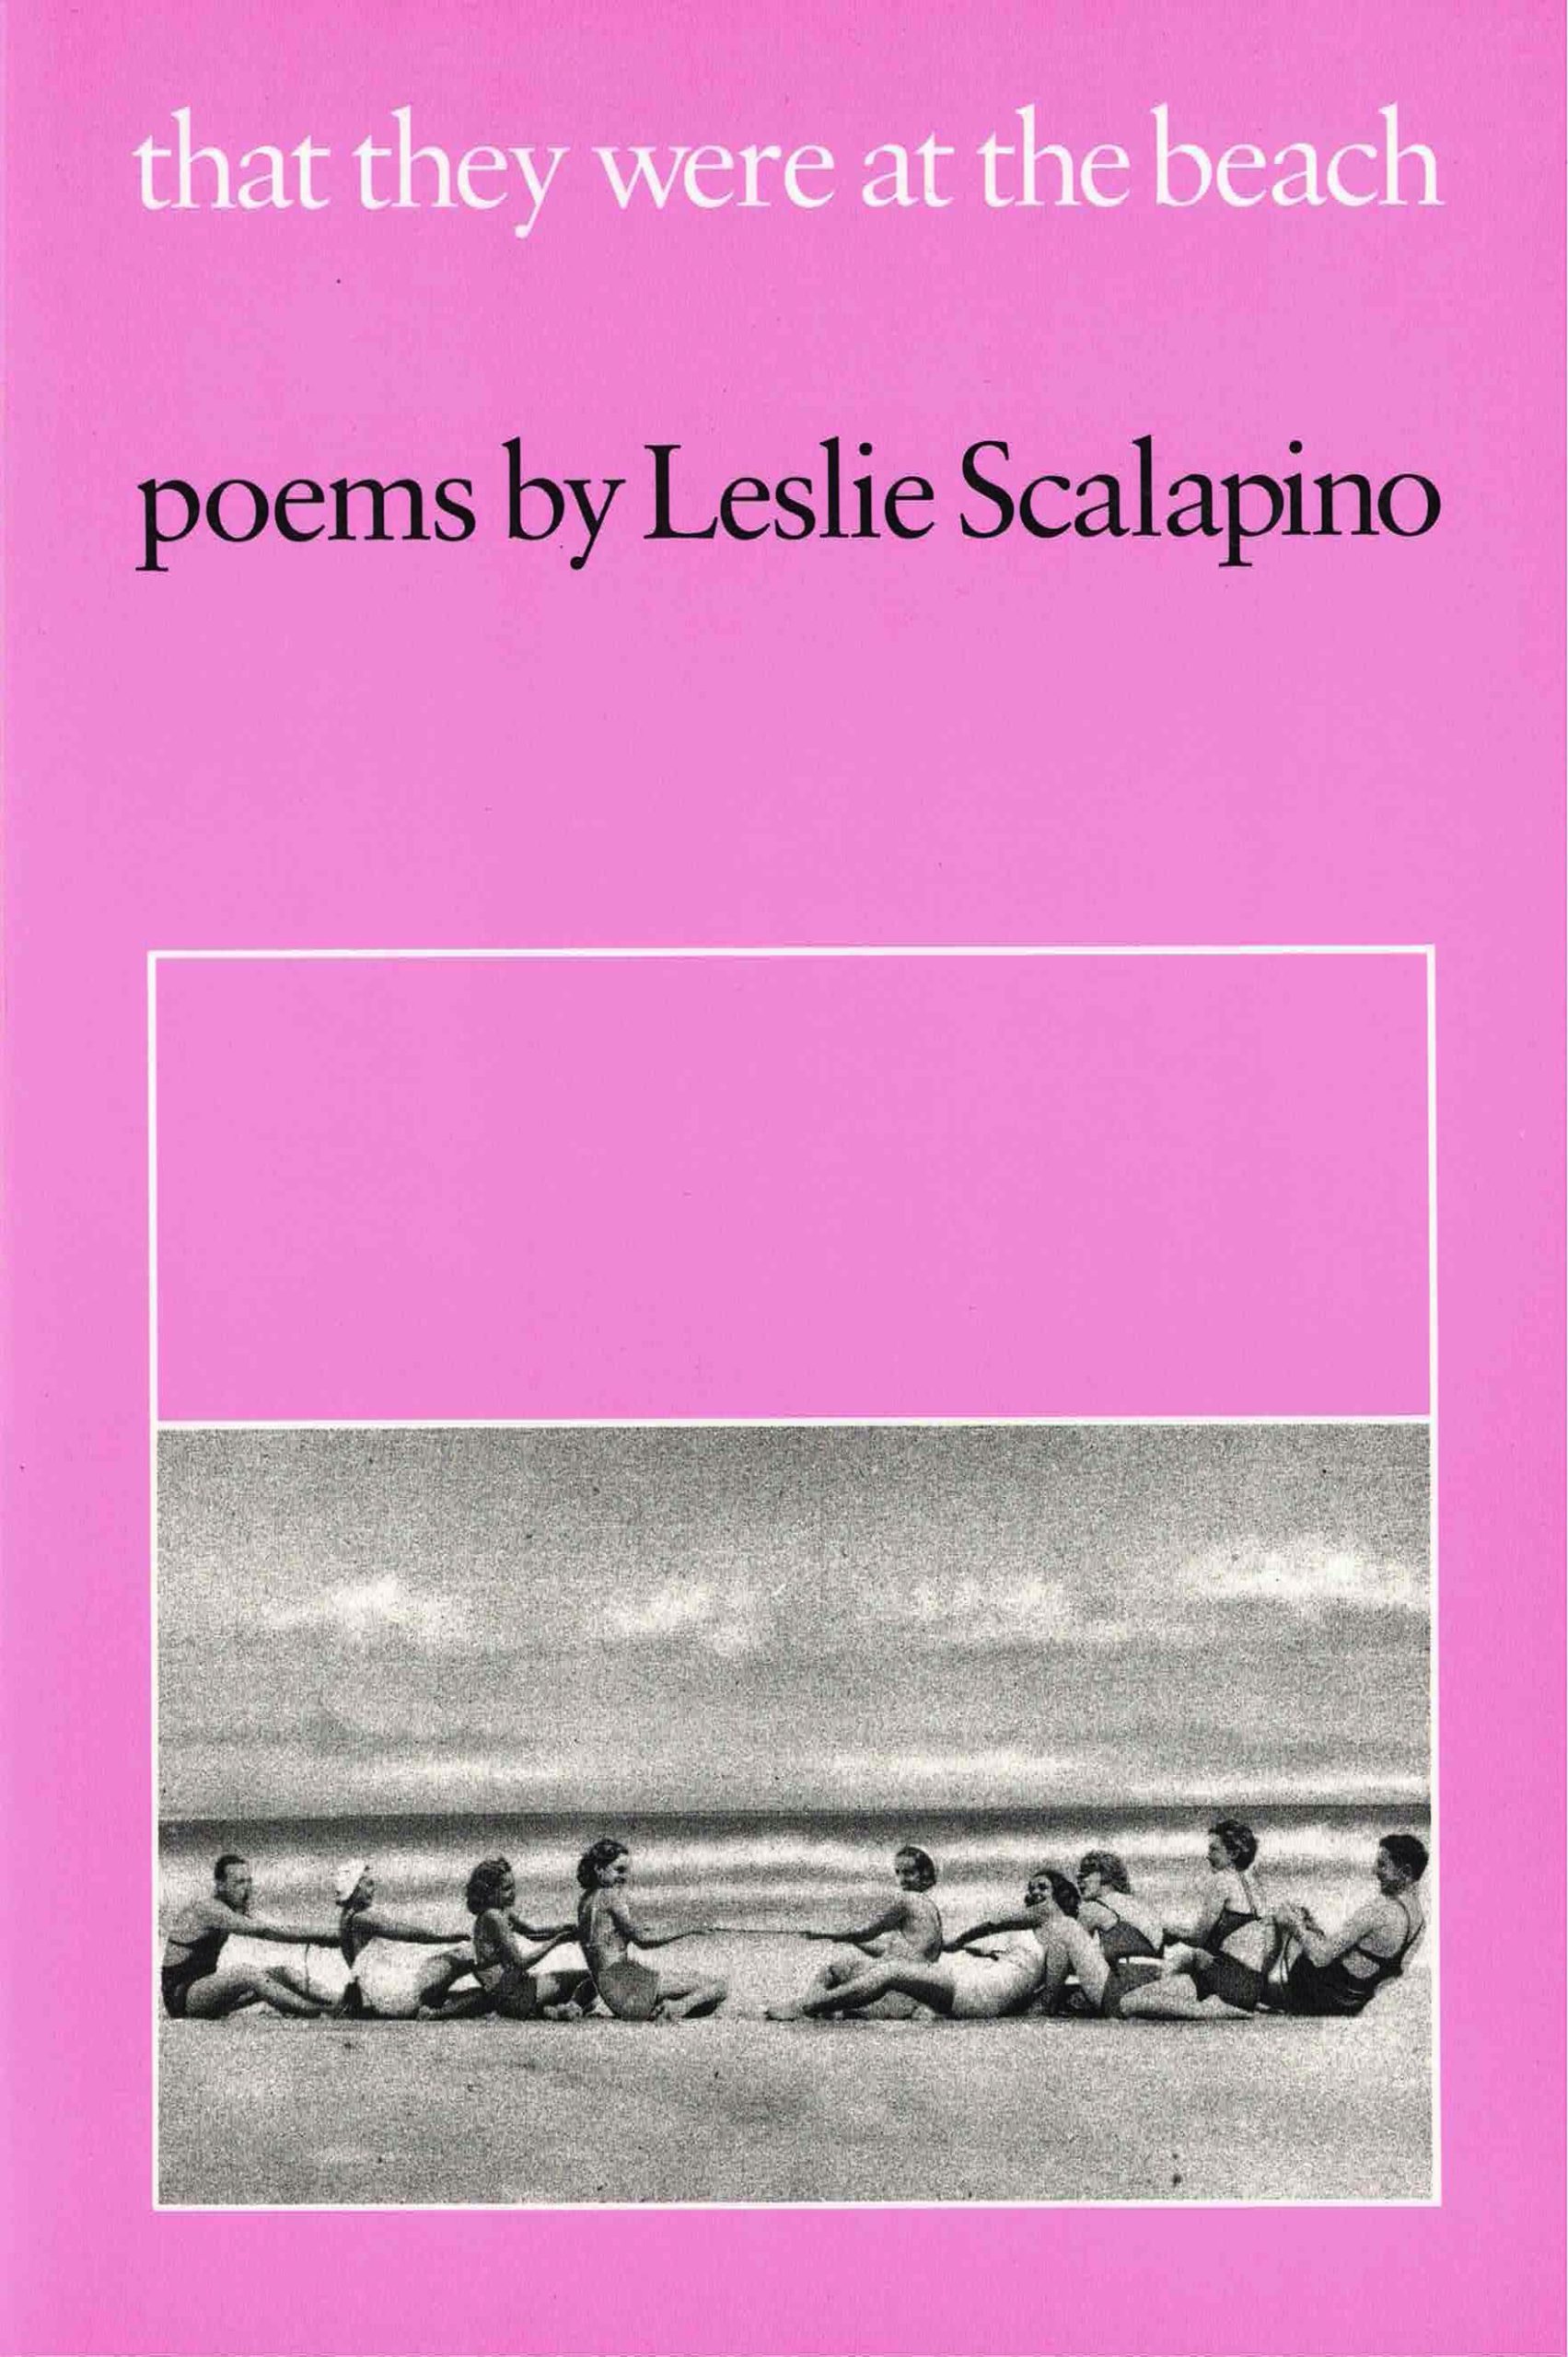 cover of "that they were at the beach" by leslie scalapino, pink background with a b&w image across the bottom of two groups of people in swimwear playing tug-of-war on the beach